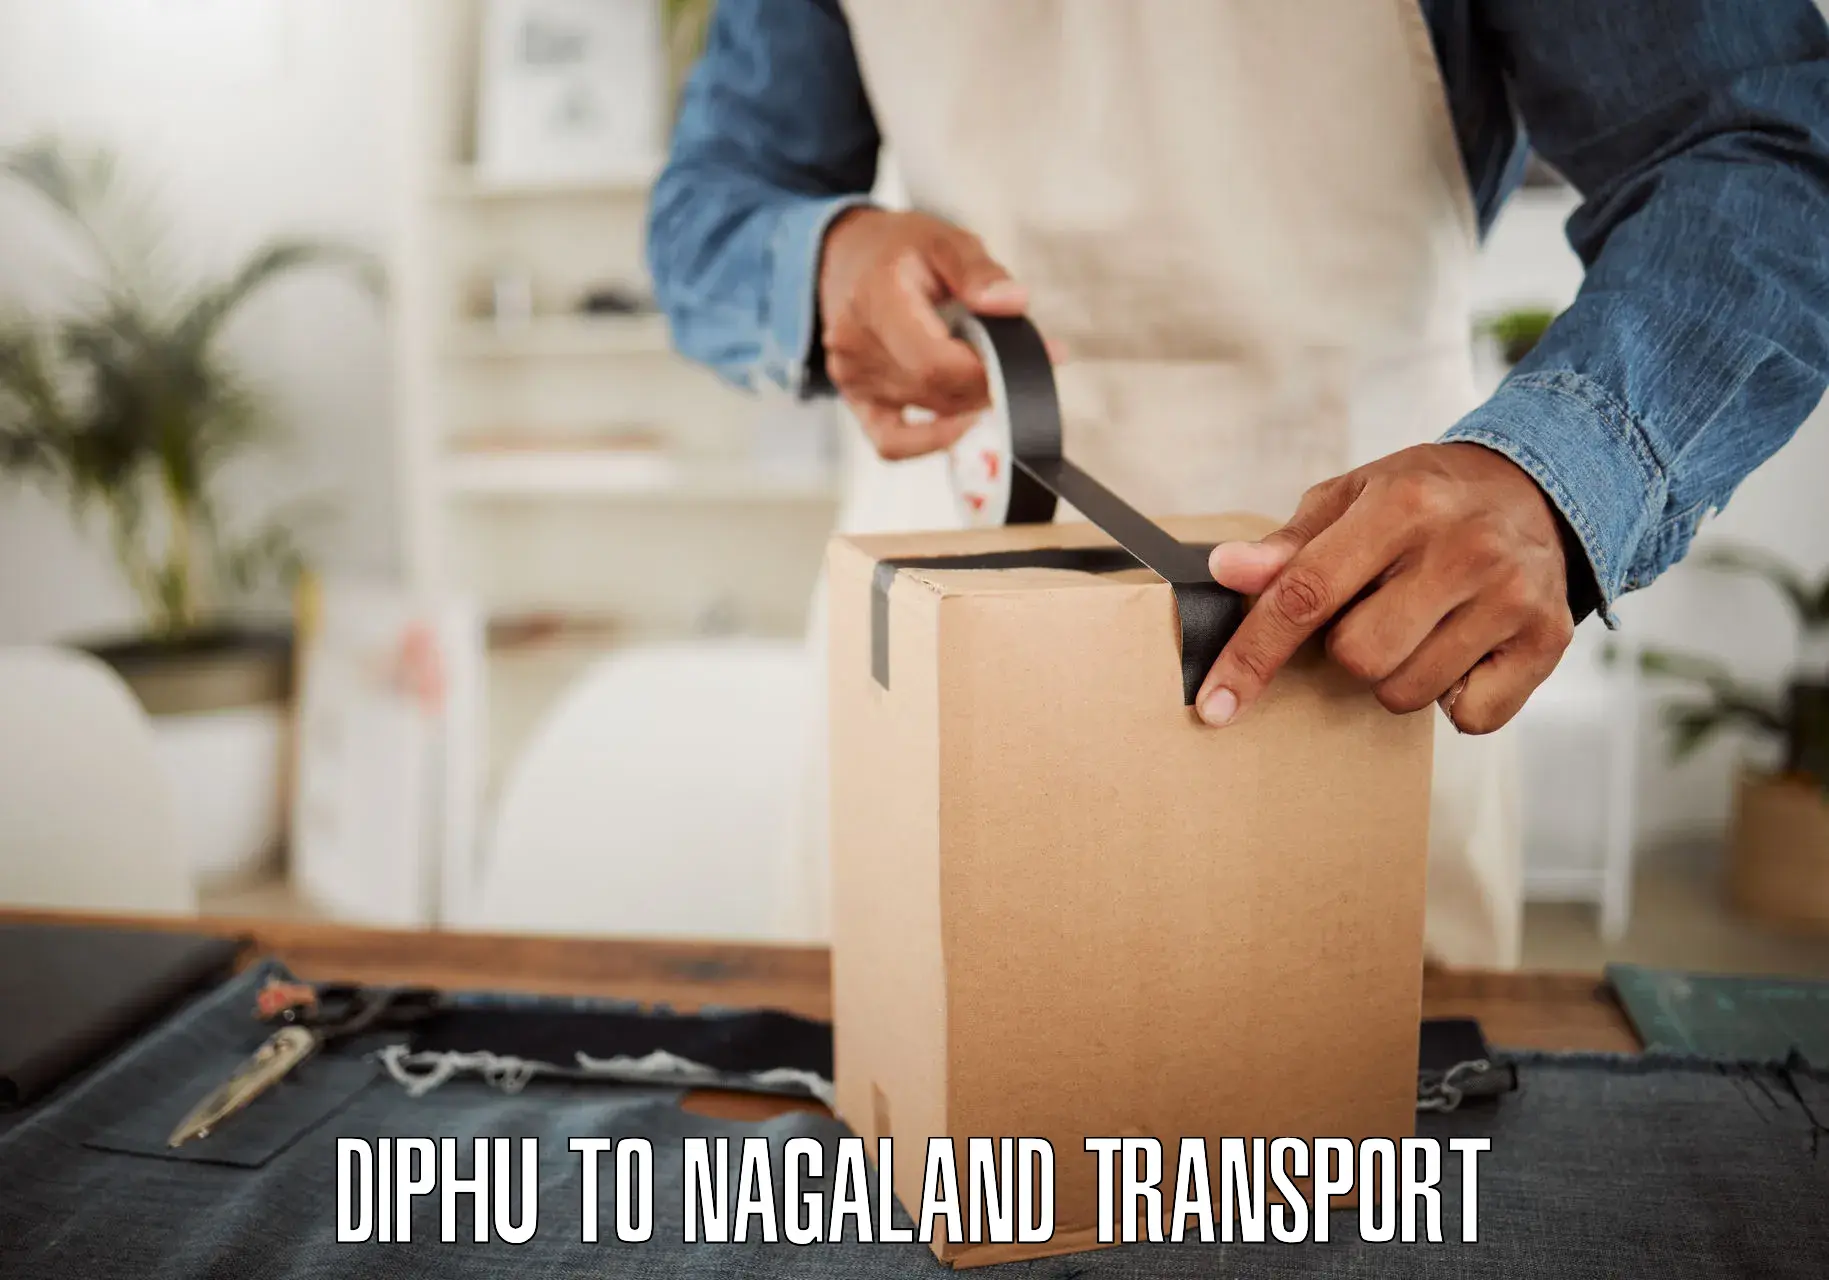 Luggage transport services Diphu to Nagaland